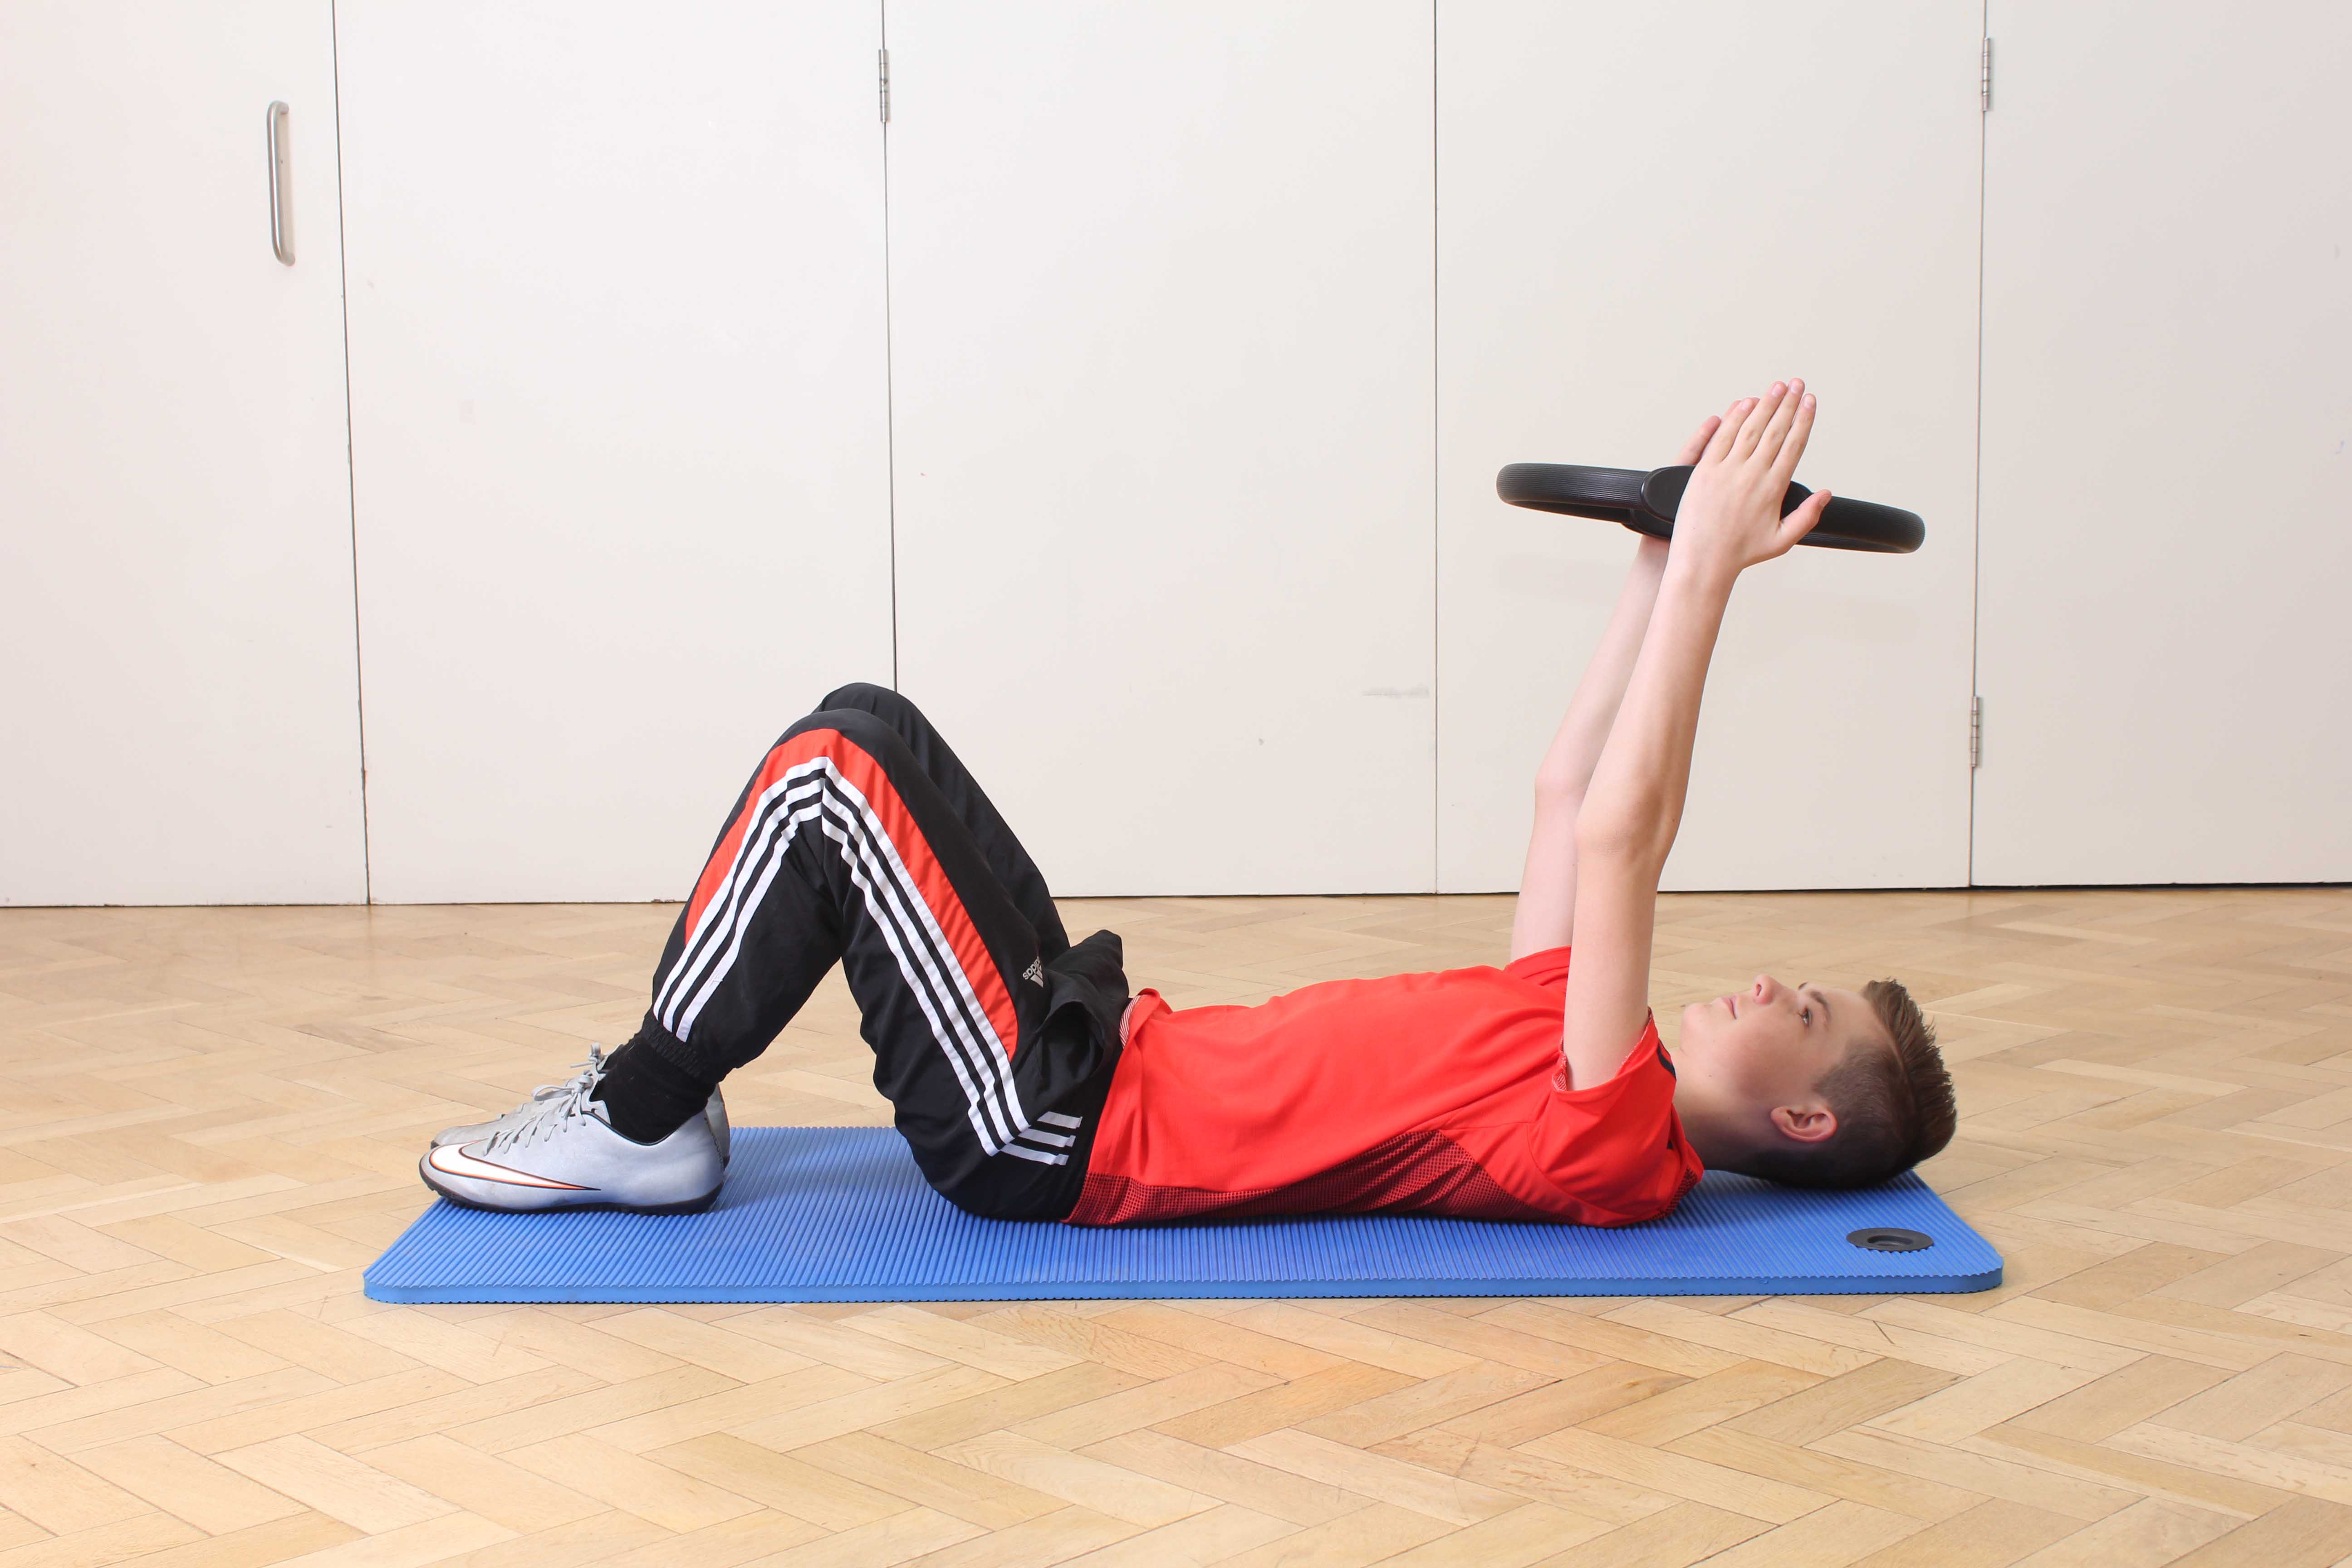 Upper limb strengthening and mobility exercises